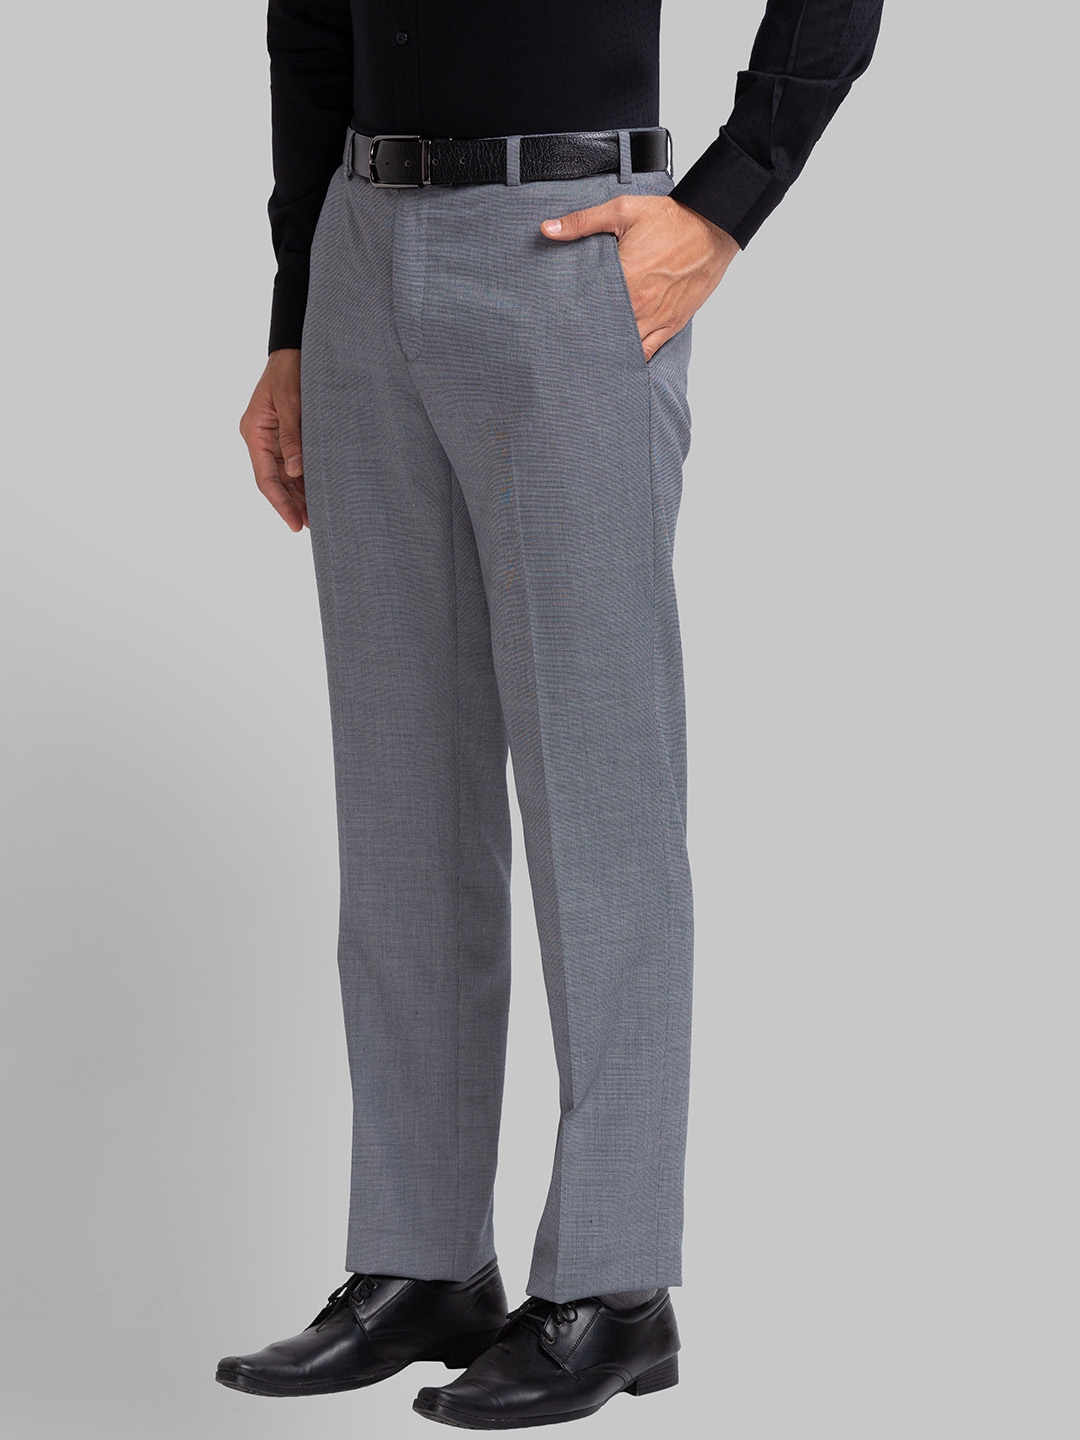 Buy RAYMOND Mens 4 Pocket Striped Formal Trousers | Shoppers Stop